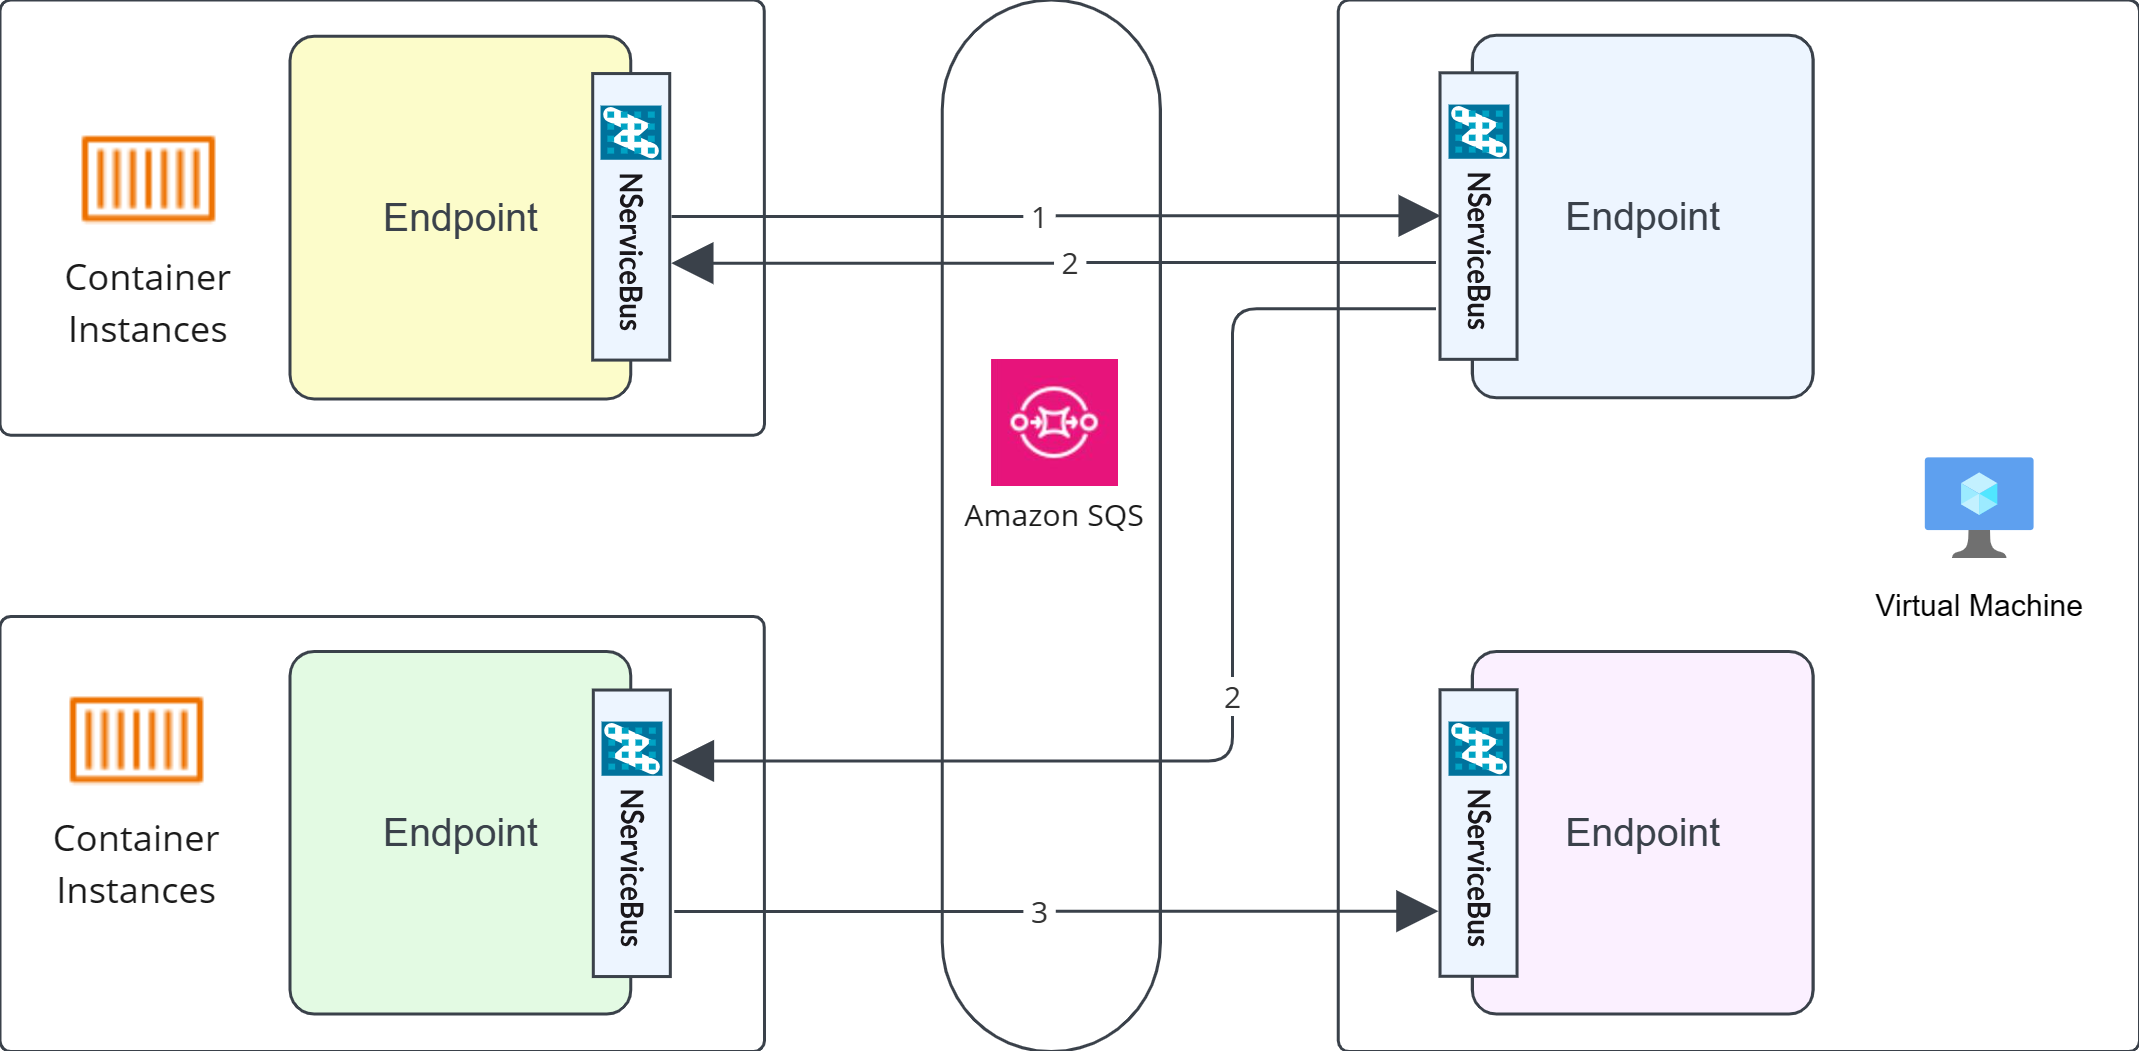 A depiction of an event-driven architecture using AWS and NServiceBus